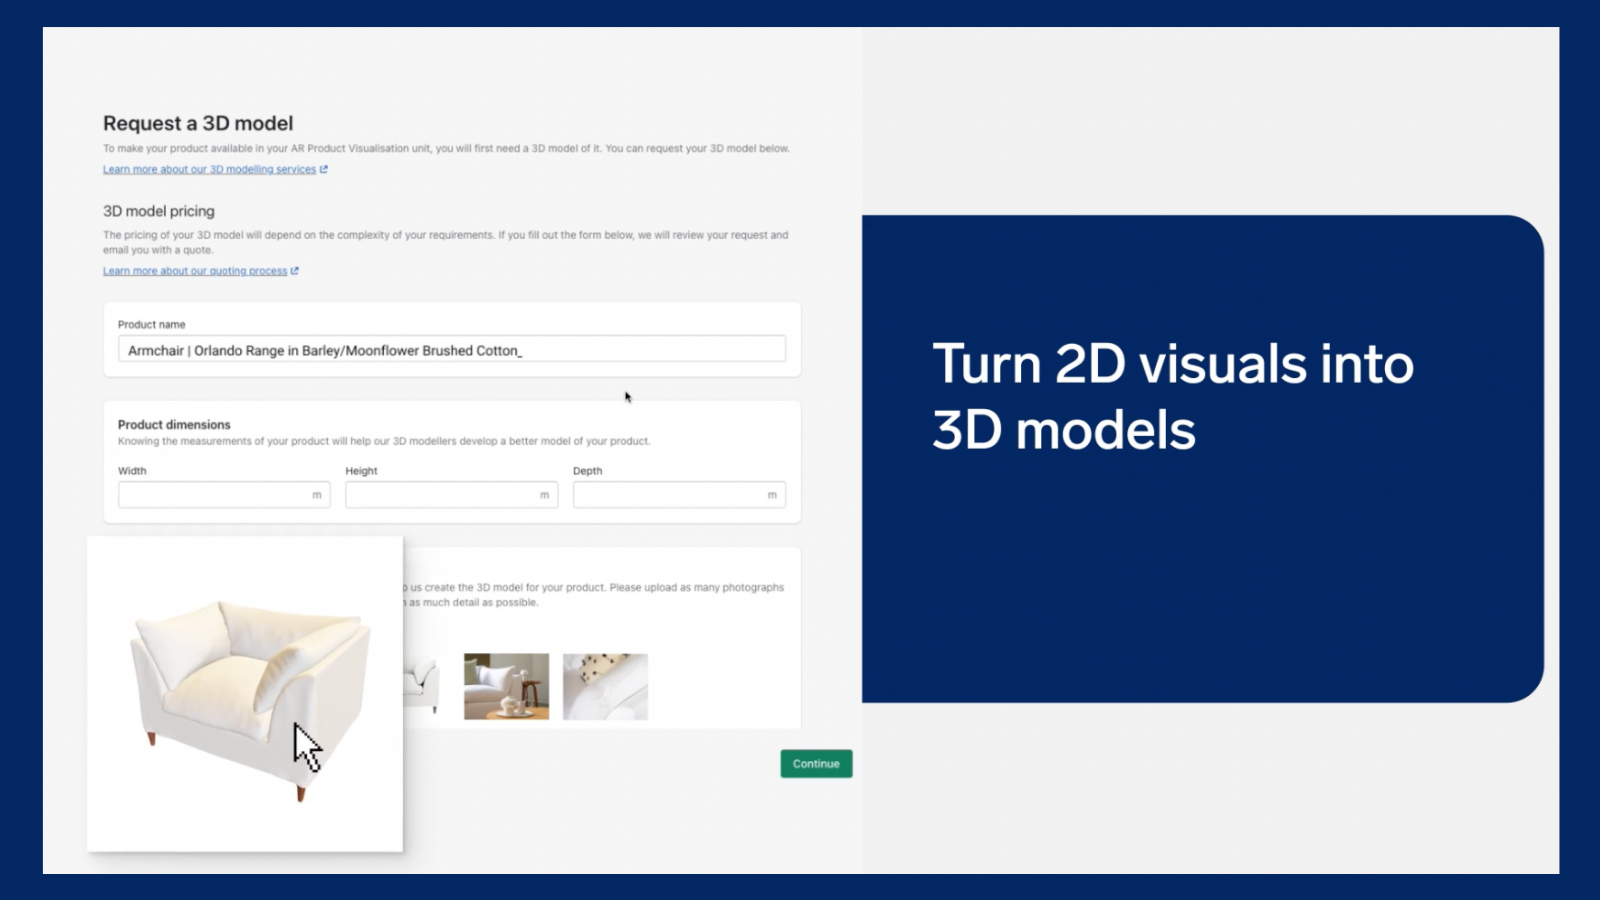 A form enabling merchants to request 3D models of products